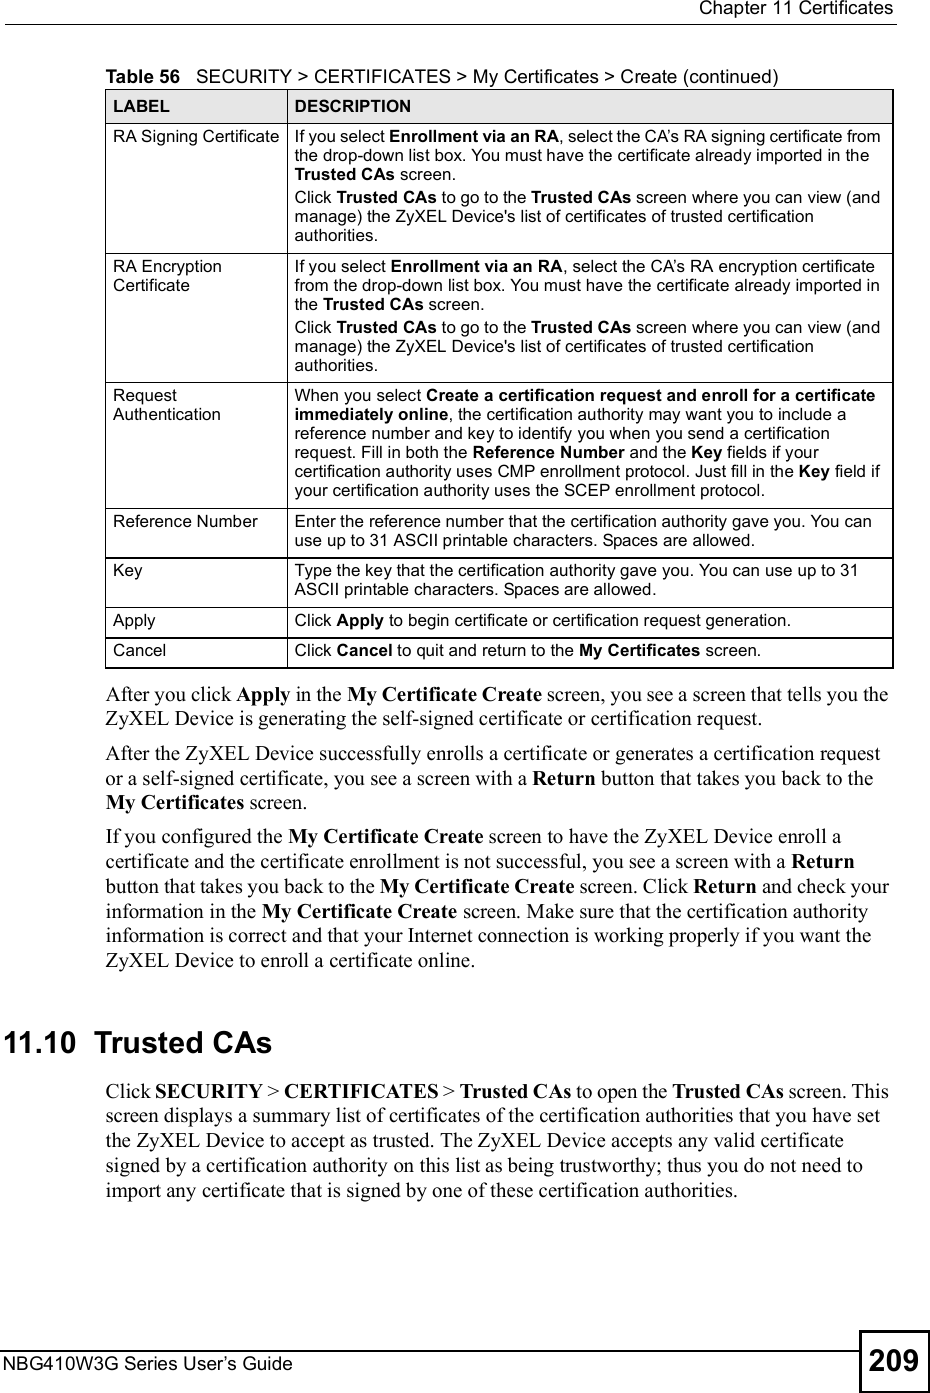  Chapter 11CertificatesNBG410W3G Series User s Guide 209After you click Apply in the My Certificate Create screen, you see a screen that tells you the ZyXEL Device is generating the self-signed certificate or certification request. After the ZyXEL Device successfully enrolls a certificate or generates a certification request or a self-signed certificate, you see a screen with a Return button that takes you back to the My Certificates screen.If you configured the My Certificate Create screen to have the ZyXEL Device enroll a certificate and the certificate enrollment is not successful, you see a screen with a Return button that takes you back to the My Certificate Create screen. Click Return and check your information in the My Certificate Create screen. Make sure that the certification authority information is correct and that your Internet connection is working properly if you want the ZyXEL Device to enroll a certificate online.11.10  Trusted CAs   Click SECURITY &gt; CERTIFICATES &gt; Trusted CAs to open the Trusted CAs screen. This screen displays a summary list of certificates of the certification authorities that you have set the ZyXEL Device to accept as trusted. The ZyXEL Device accepts any valid certificate signed by a certification authority on this list as being trustworthy; thus you do not need to import any certificate that is signed by one of these certification authorities. RA Signing CertificateIf you select Enrollment via an RA, select the CA s RA signing certificate from the drop-down list box. You must have the certificate already imported in the Trusted CAs screen.Click Trusted CAs to go to the Trusted CAs screen where you can view (and manage) the ZyXEL Device&apos;s list of certificates of trusted certification authorities.RA Encryption CertificateIf you select Enrollment via an RA, select the CA s RA encryption certificate from the drop-down list box. You must have the certificate already imported in the Trusted CAs screen.Click Trusted CAs to go to the Trusted CAs screen where you can view (and manage) the ZyXEL Device&apos;s list of certificates of trusted certification authorities.Request AuthenticationWhen you select Create a certification request and enroll for a certificate immediately online, the certification authority may want you to include a reference number and key to identify you when you send a certification request. Fill in both the Reference Number and the Key fields if your certification authority uses CMP enrollment protocol. Just fill in the Key field if your certification authority uses the SCEP enrollment protocol. Reference NumberEnter the reference number that the certification authority gave you. You can use up to 31 ASCII printable characters. Spaces are allowed.KeyType the key that the certification authority gave you. You can use up to 31 ASCII printable characters. Spaces are allowed.ApplyClick Apply to begin certificate or certification request generation.CancelClick Cancel to quit and return to the My Certificates screen.Table 56   SECURITY &gt; CERTIFICATES &gt; My Certificates &gt; Create (continued)LABEL DESCRIPTION